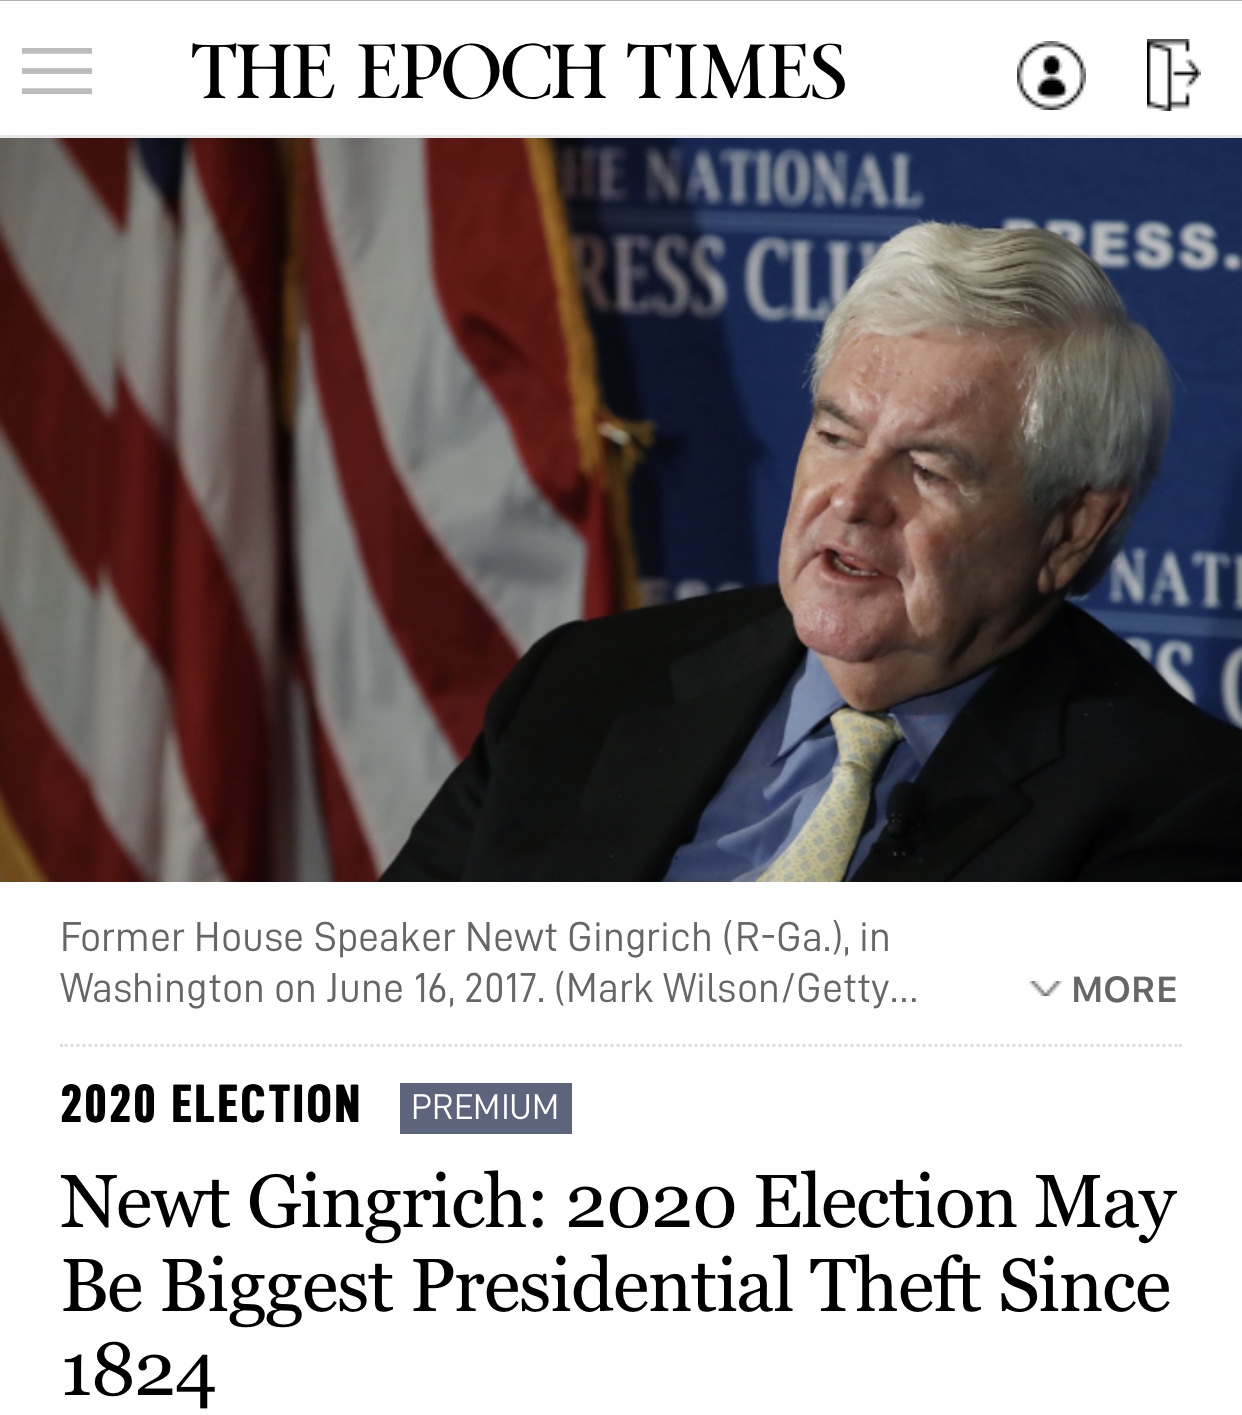 Newt Gingrich: 2020 Election May Be Biggest Presidential Theft Since 1824